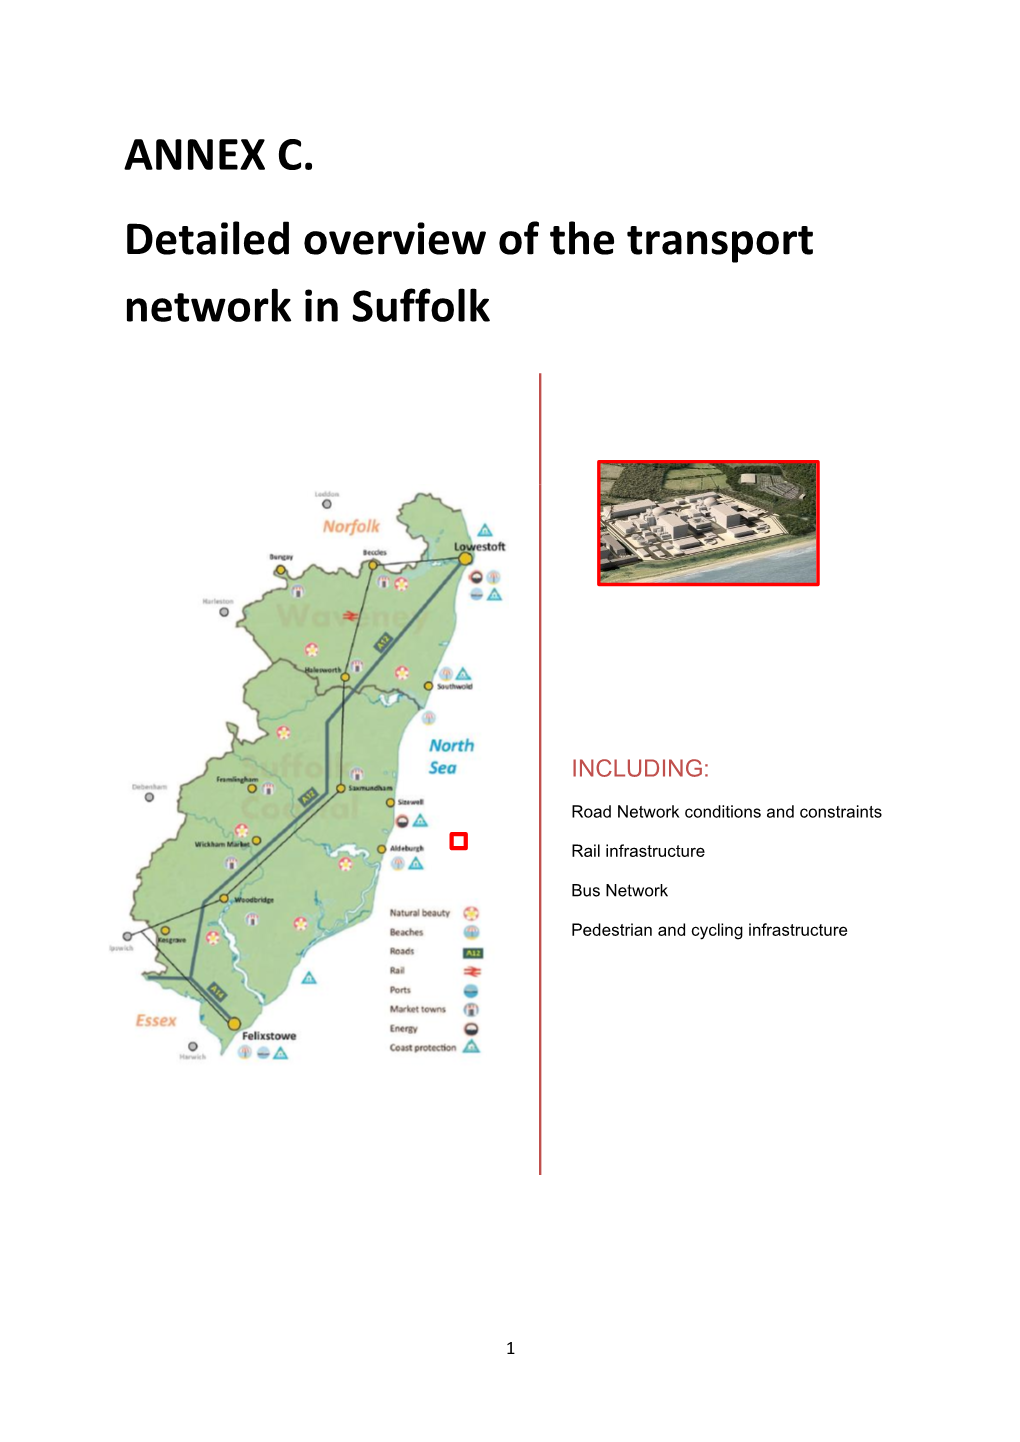 ANNEX C. Detailed Overview of the Transport Network in Suffolk